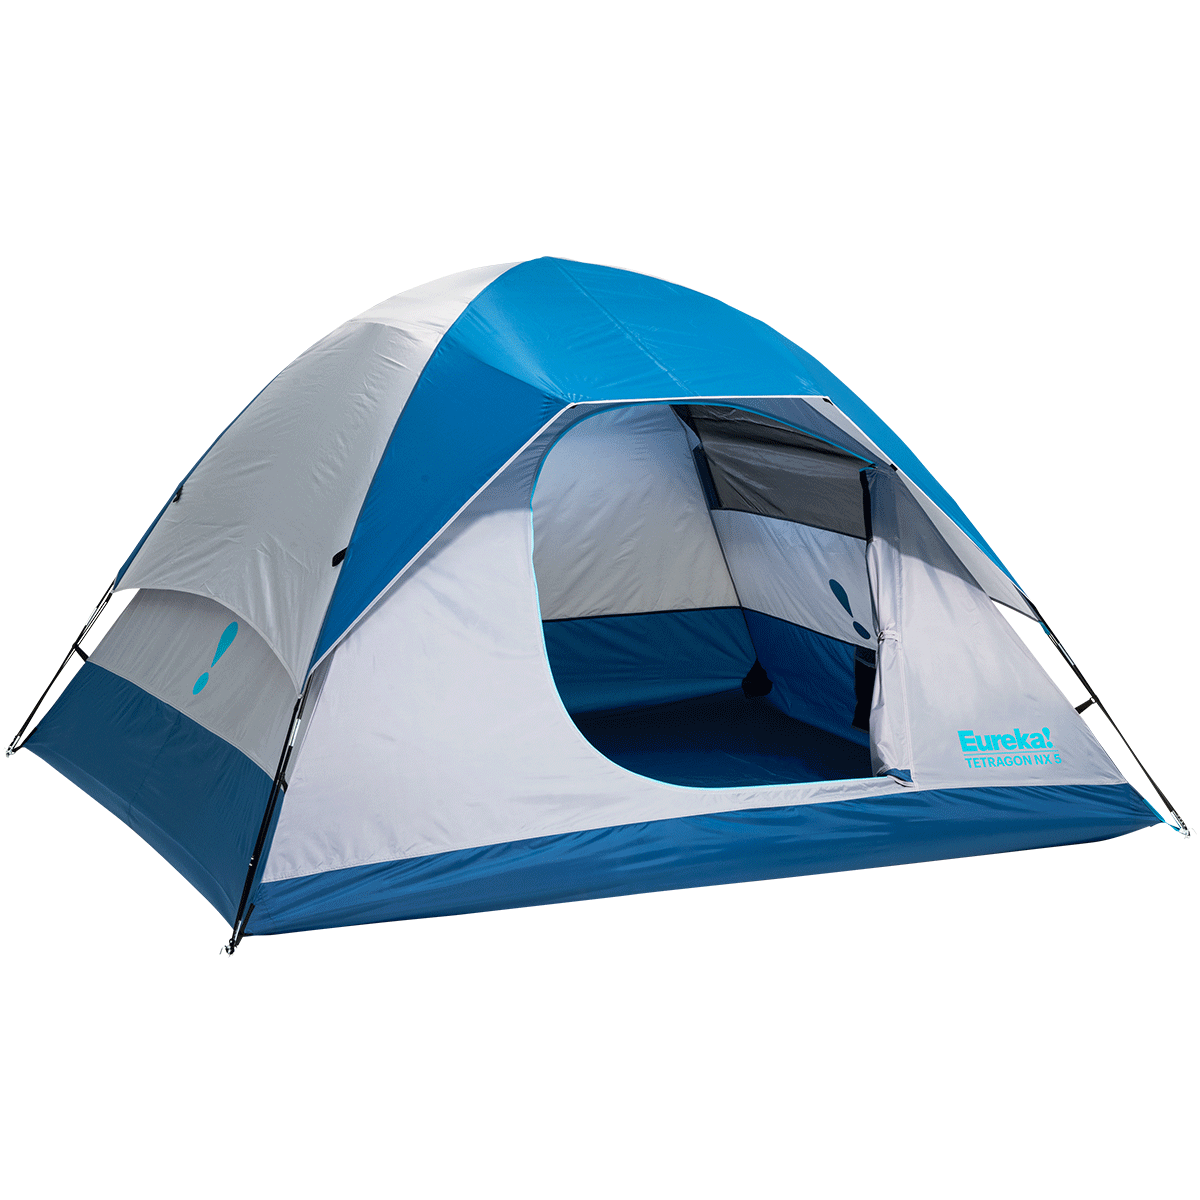 Tetragon NX 5 person tent with rainfly on and with door opened and closed